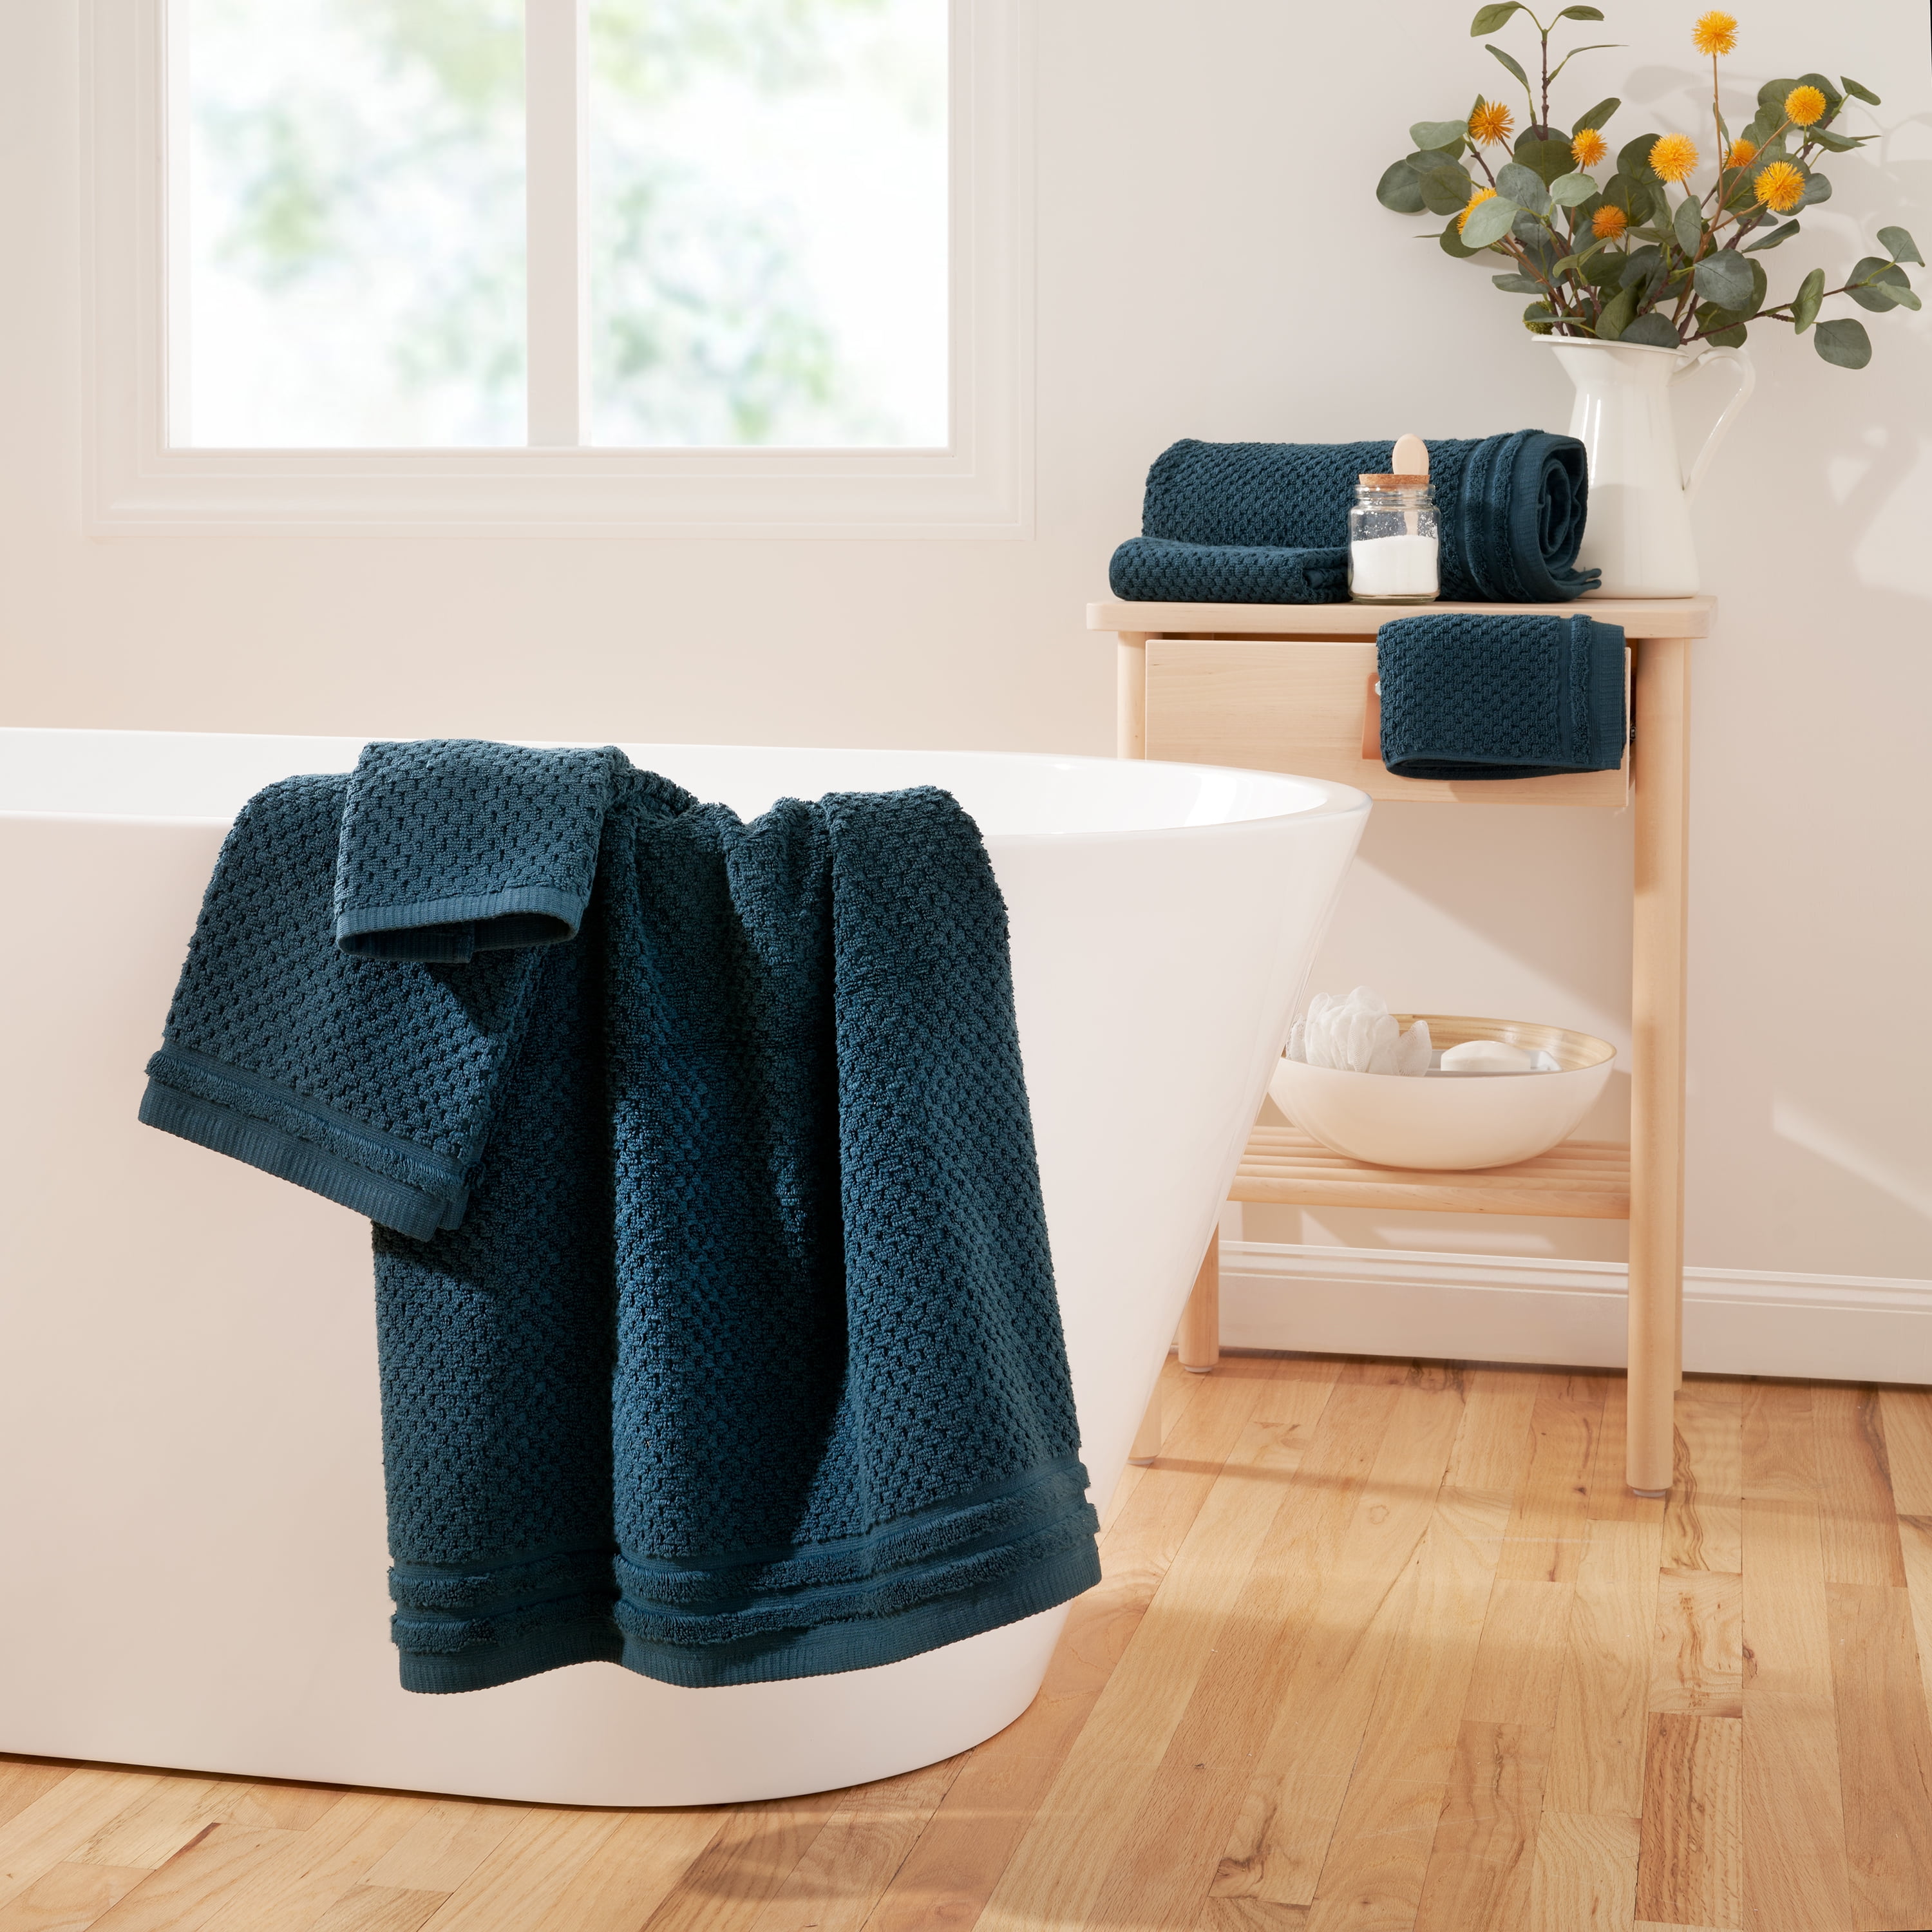 Organic Towel Sets in Charcoal Black, Towel Collection